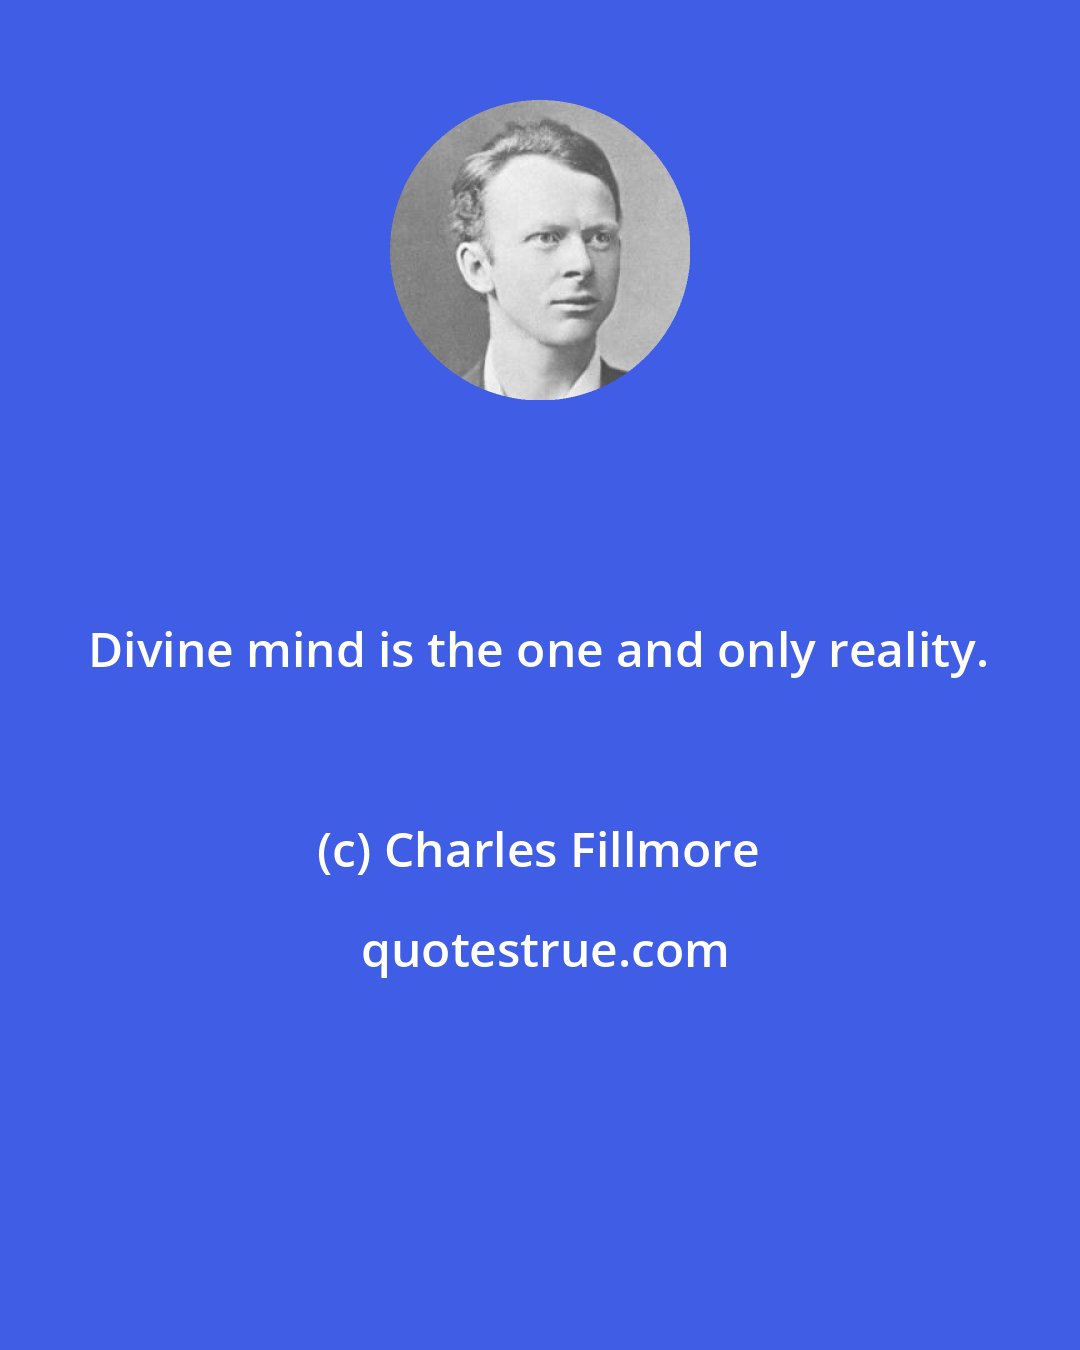 Charles Fillmore: Divine mind is the one and only reality.